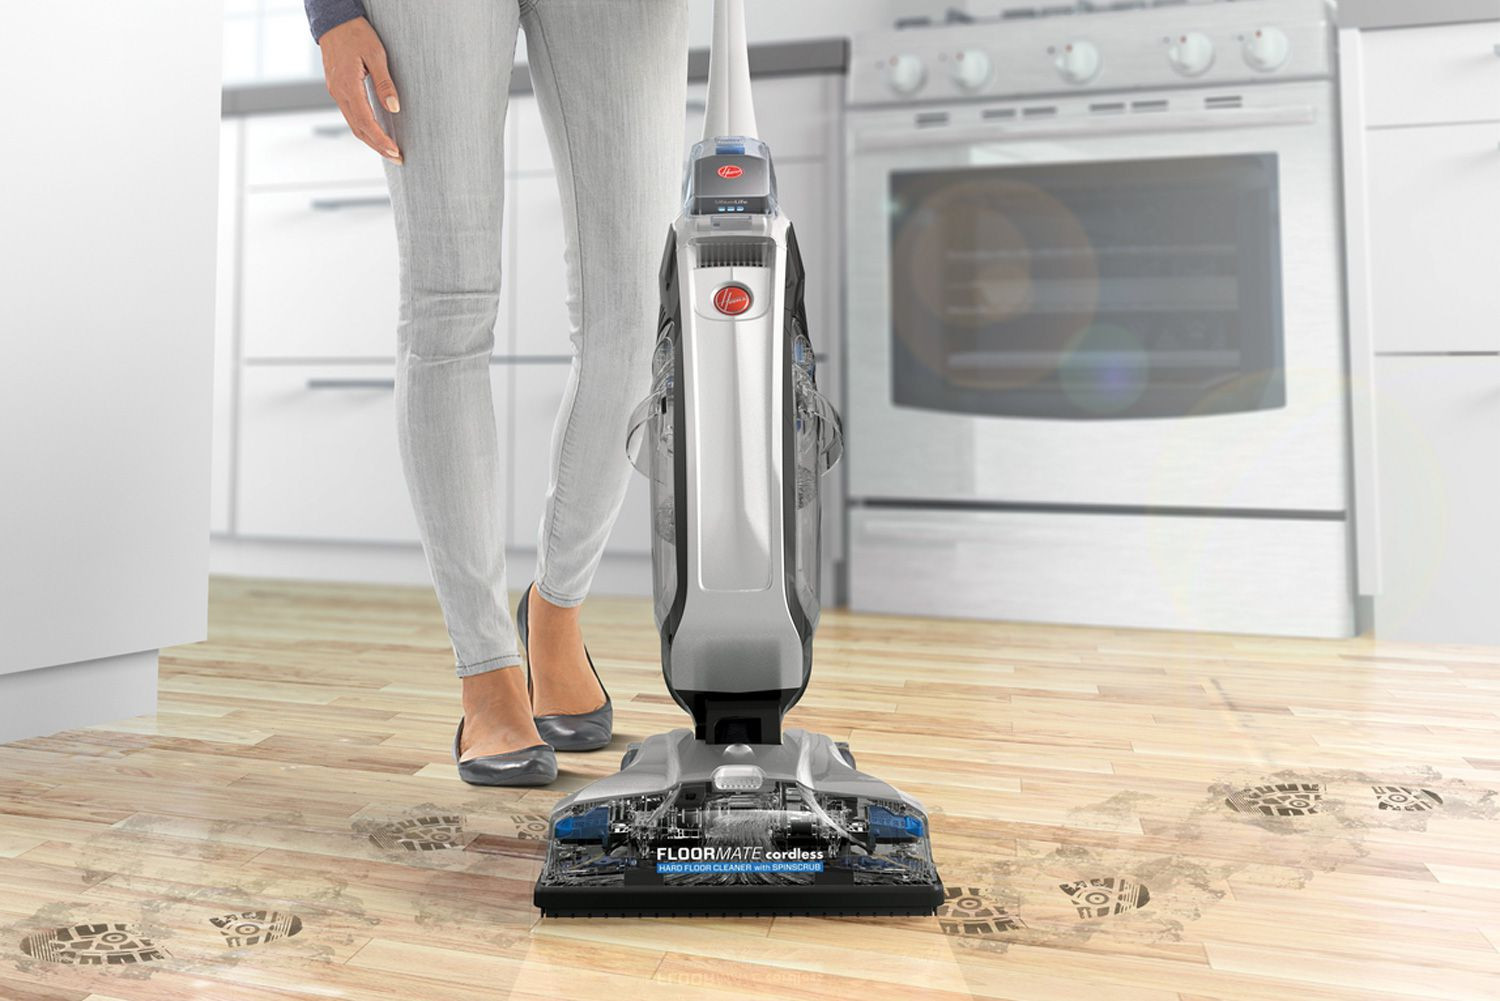 14 Great top Vacuums for Hardwood Floors 2022 free download top vacuums for hardwood floors of hoover floormate cleaner review regarding hoover floormate 59a452af685fbe00102f4ce0